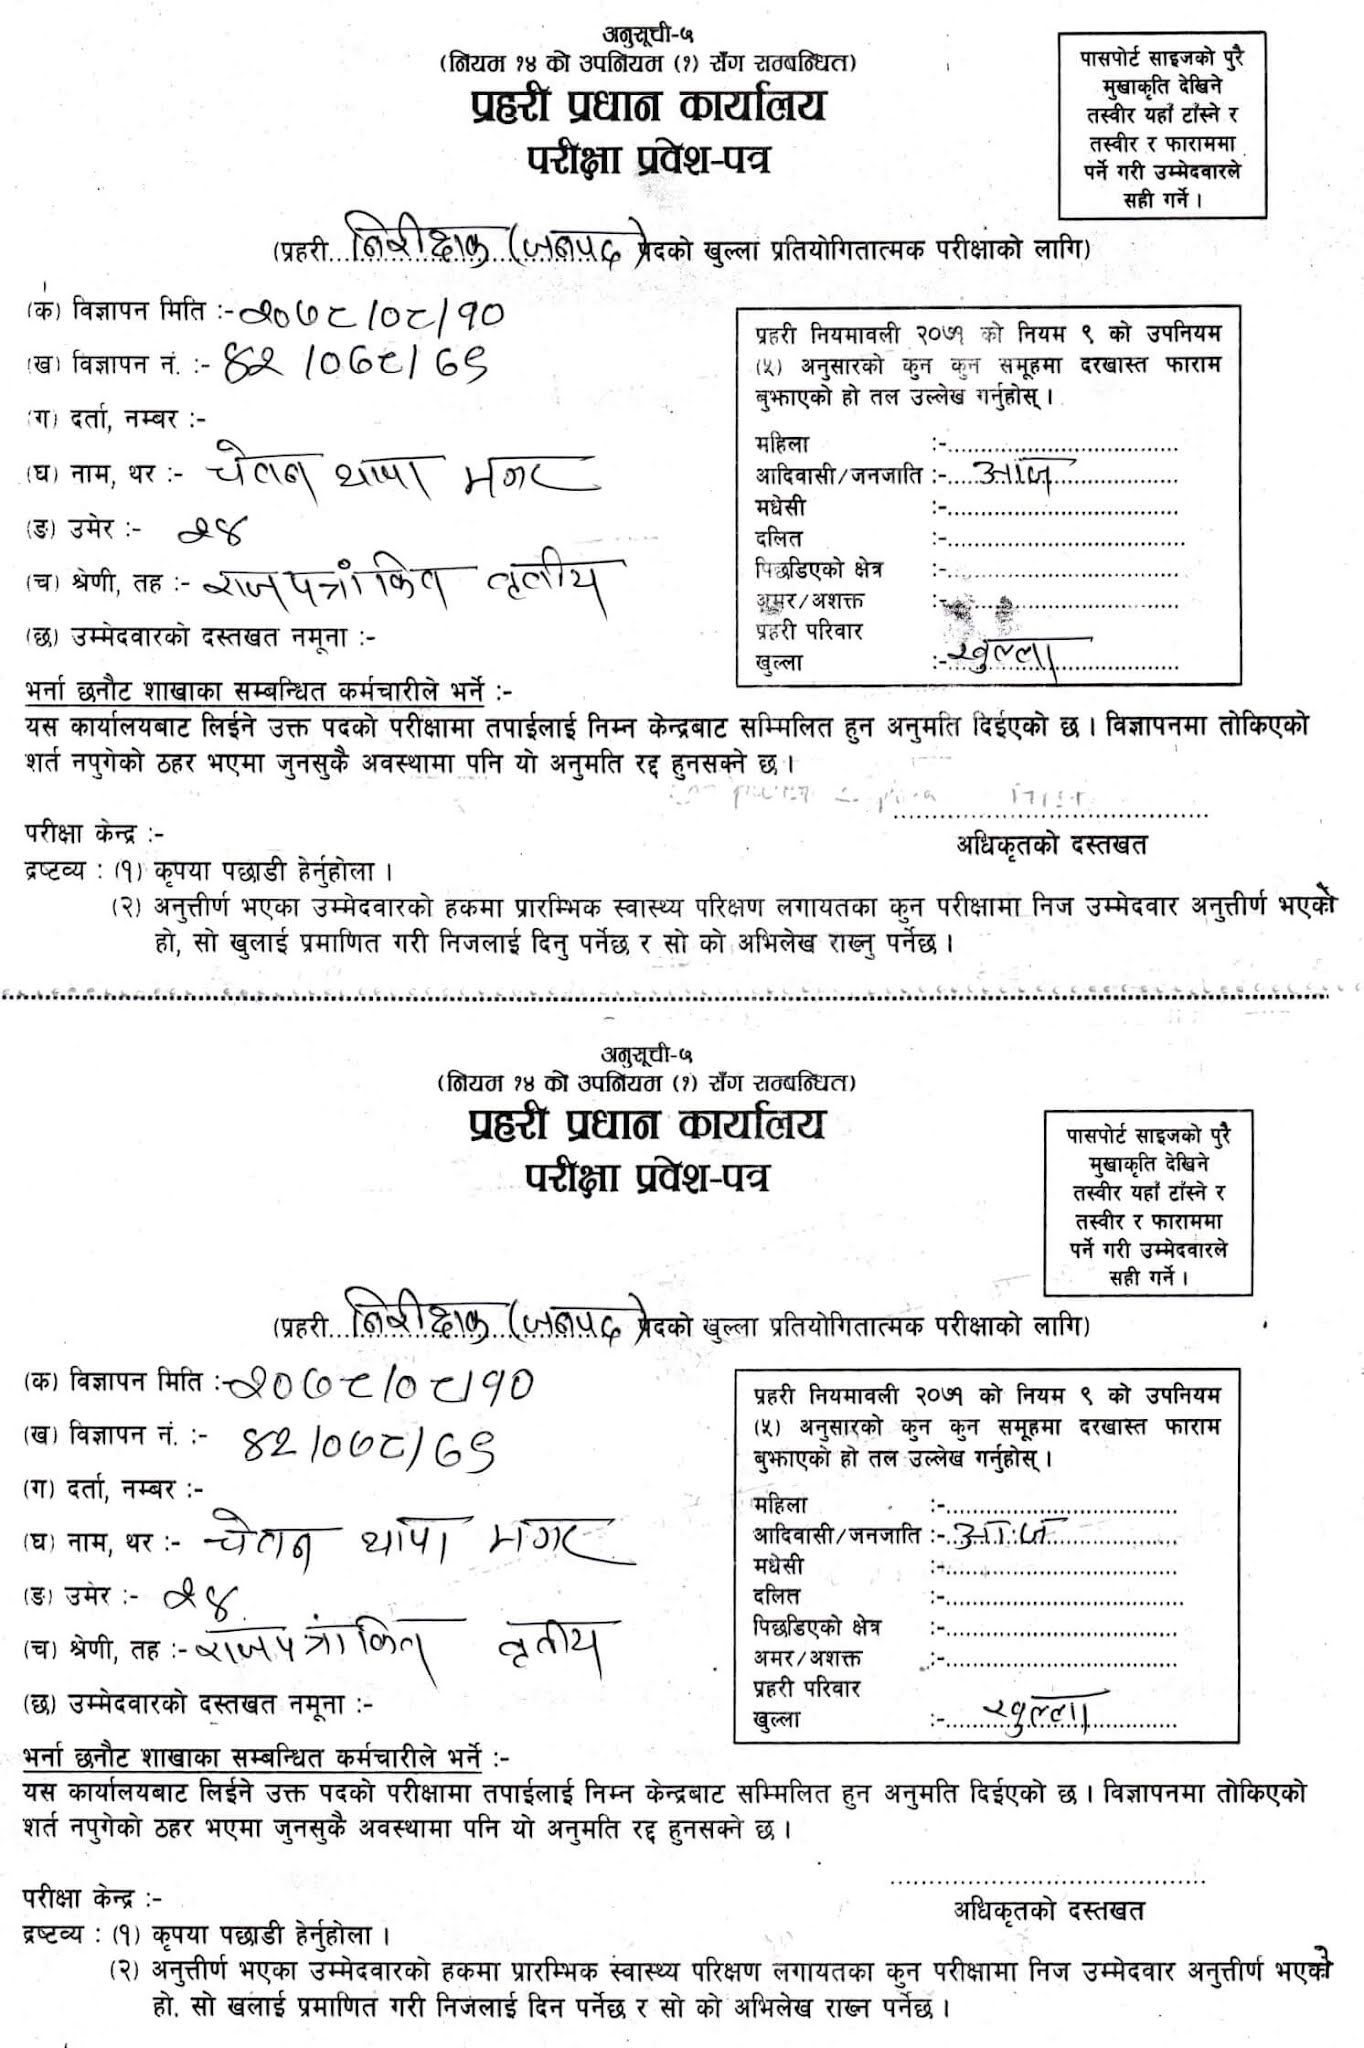 Nepal Police Inspector Demo Form and Required Document Details